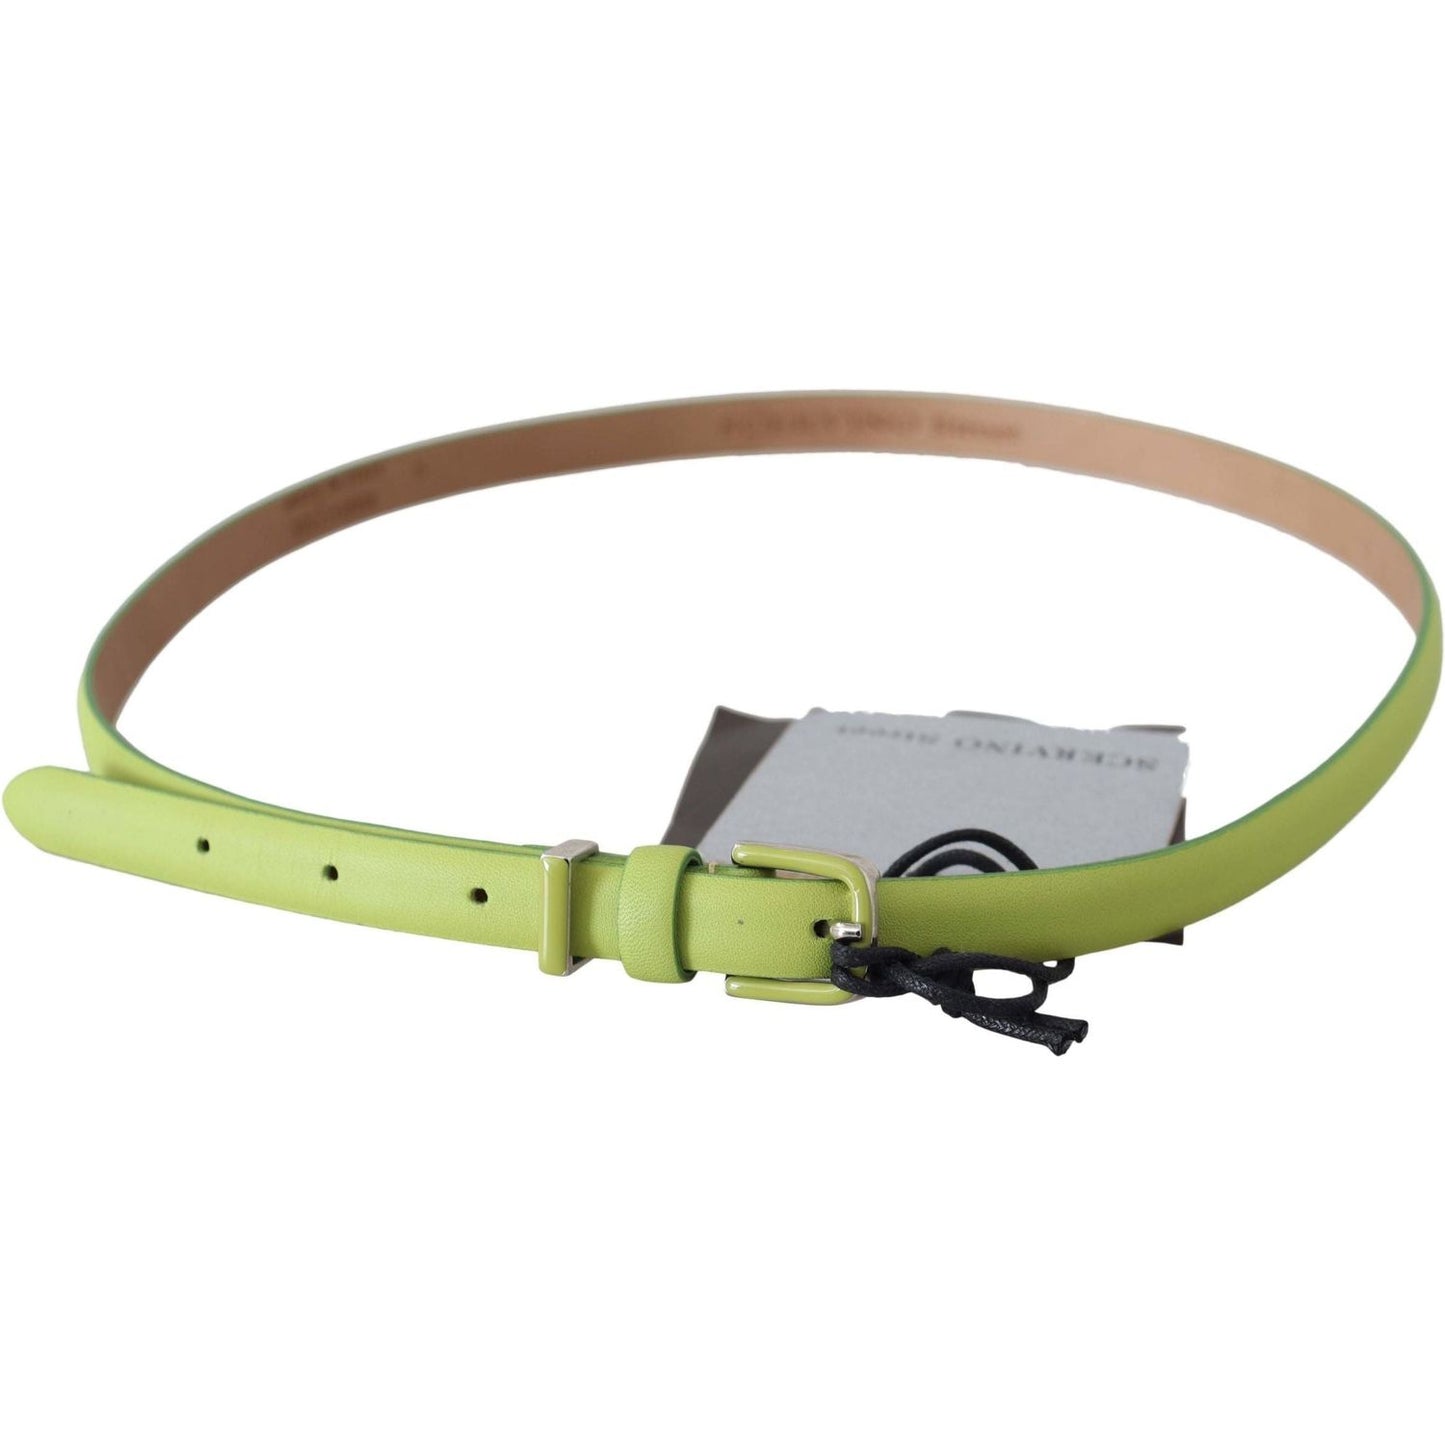 Scervino Street Classic Green Leather Belt with Silver-Tone Hardware Belt green-leather-chartreuse-silver-green-buckle-belt IMG_6305-scaled-f31ff73e-b07.jpg